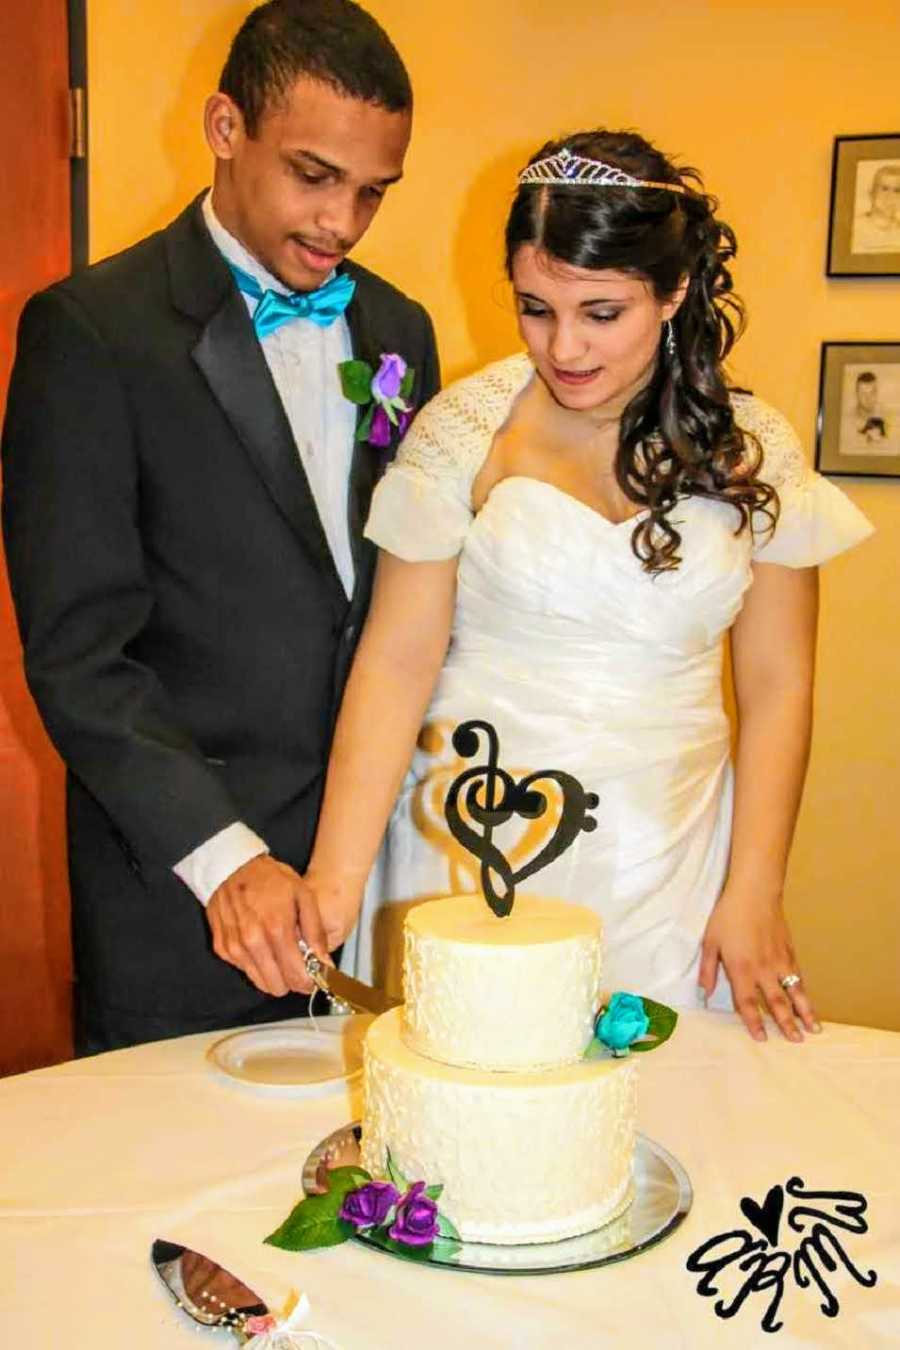 Mixed race bride and groom stand cutting their wedding cake